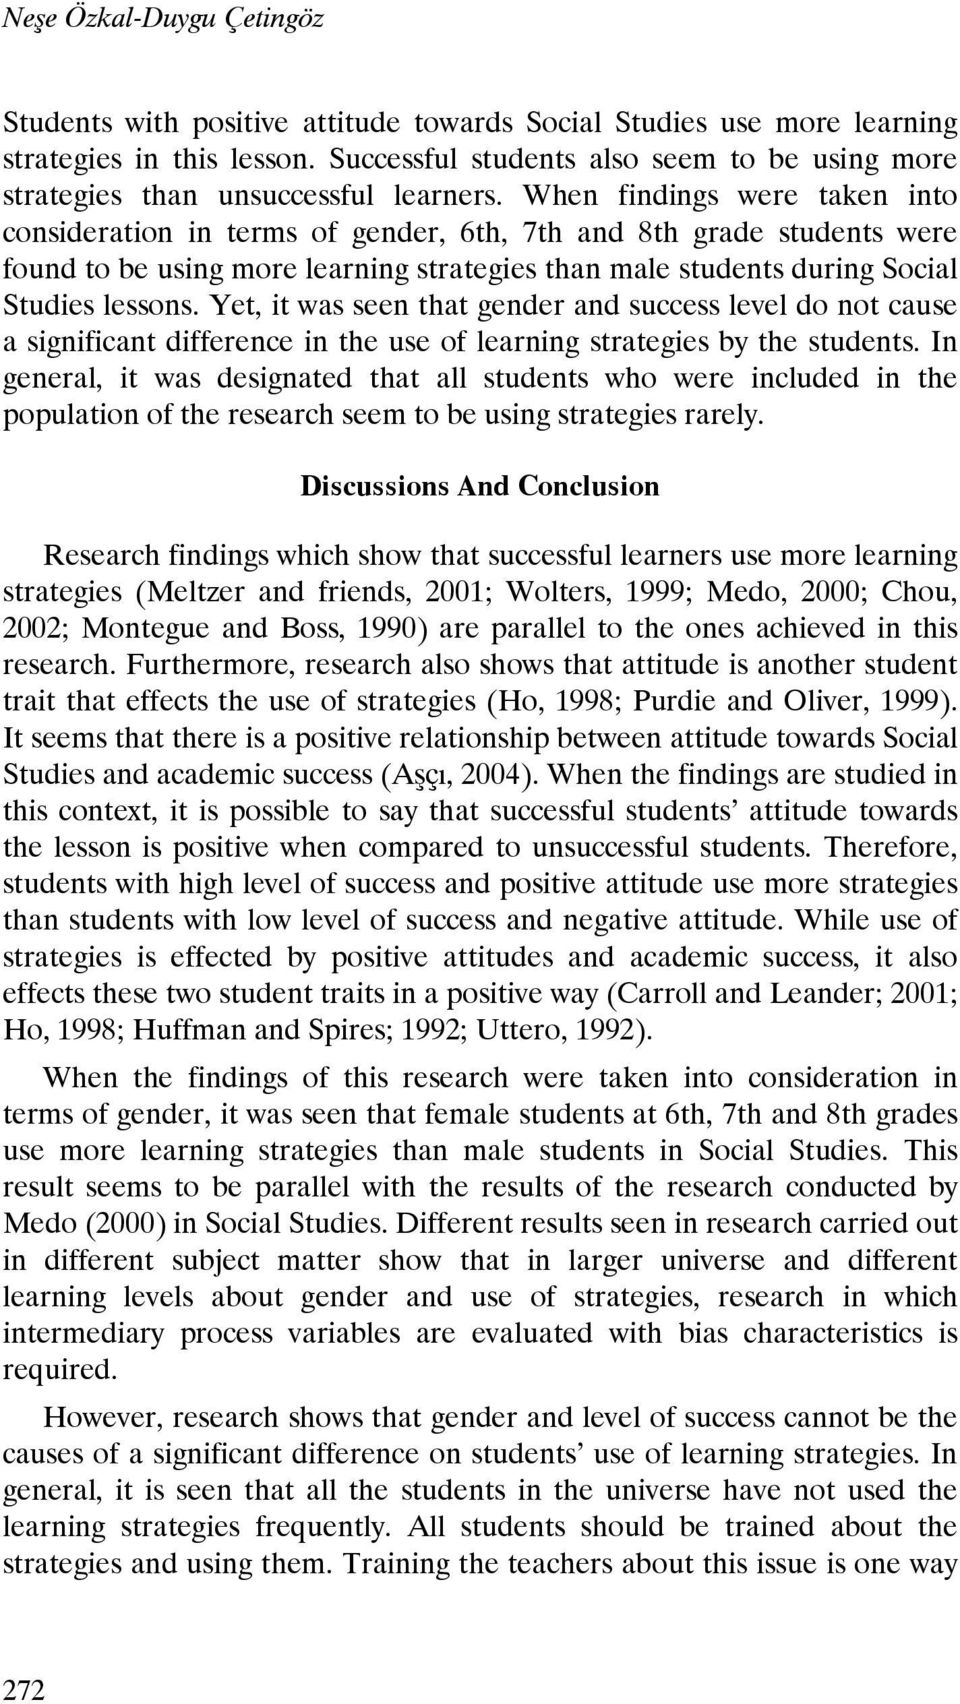 When findings were taken into consideration in terms of gender, 6th, 7th and 8th grade students were found to be using more learning strategies than male students during Social Studies lessons.